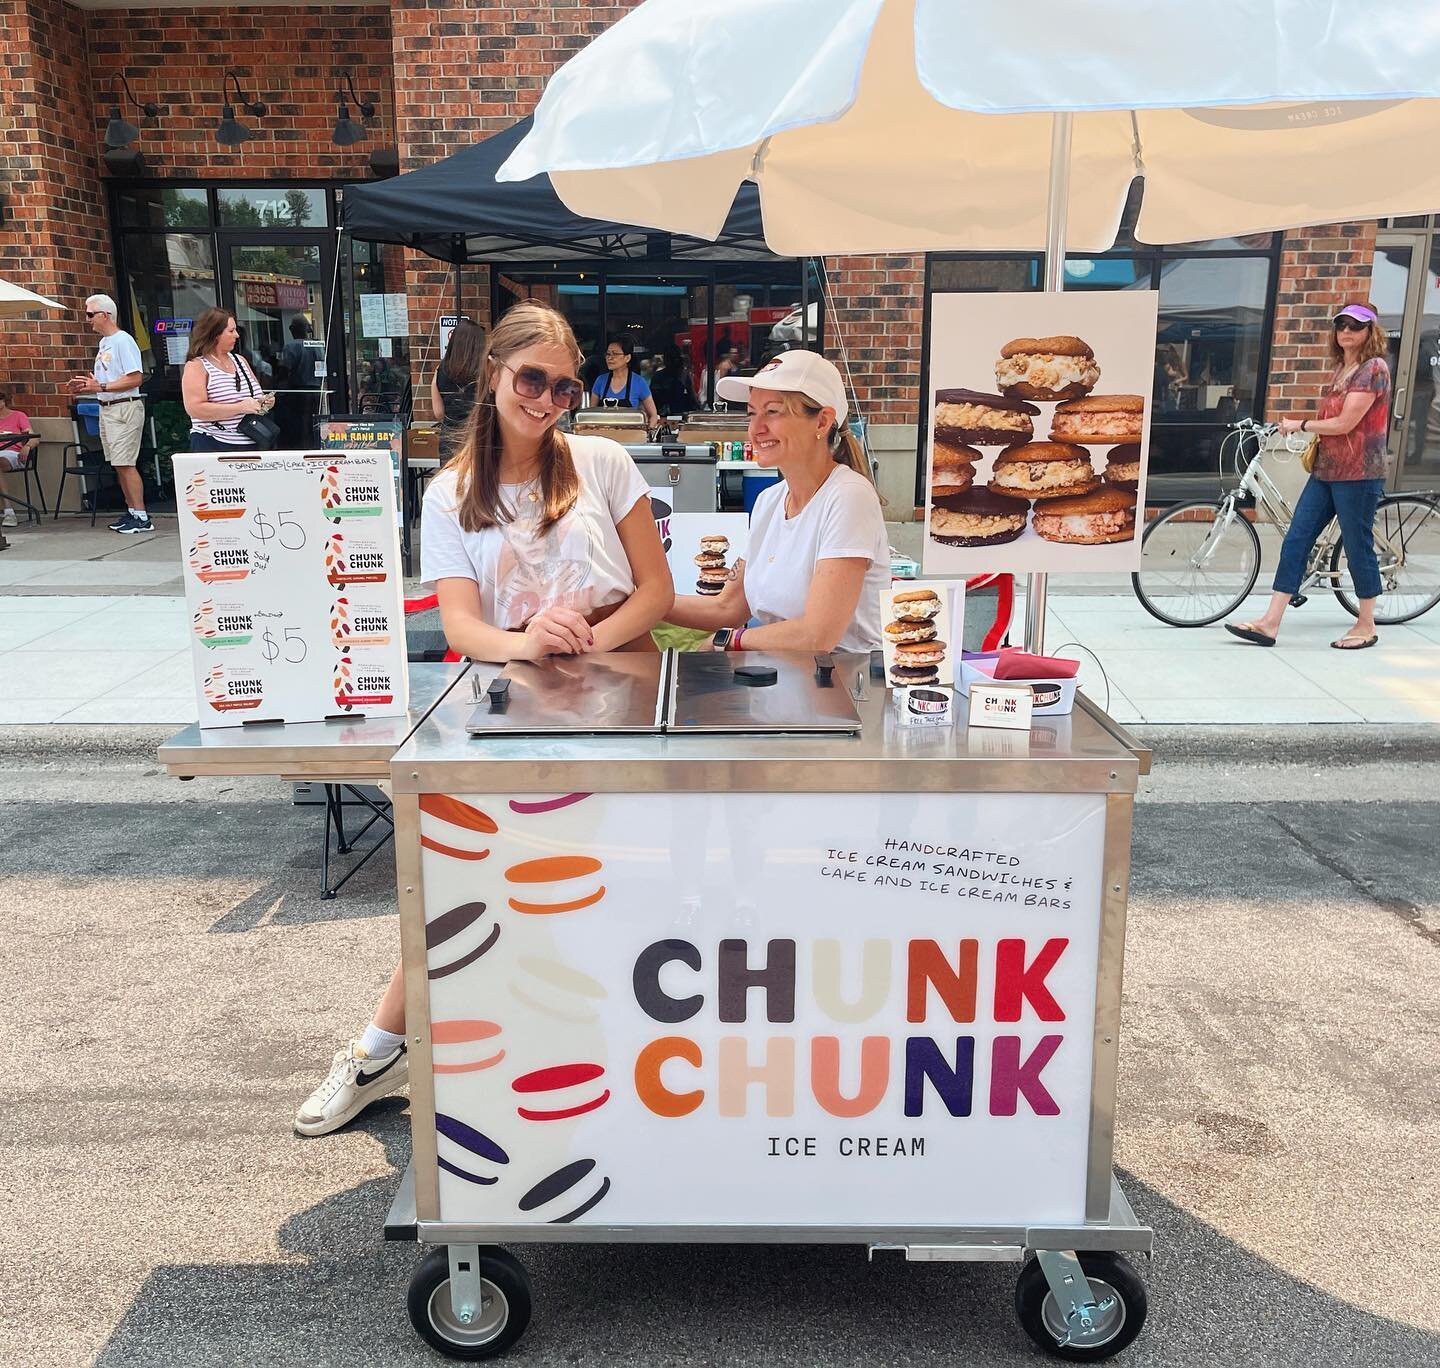 We had so much fun at the raspberry festival today! Thank you so much to everyone who came out to support us!🩷

If you didn&rsquo;t get a chance to stop by, click the link in our bio to find ChunkChunk near you!